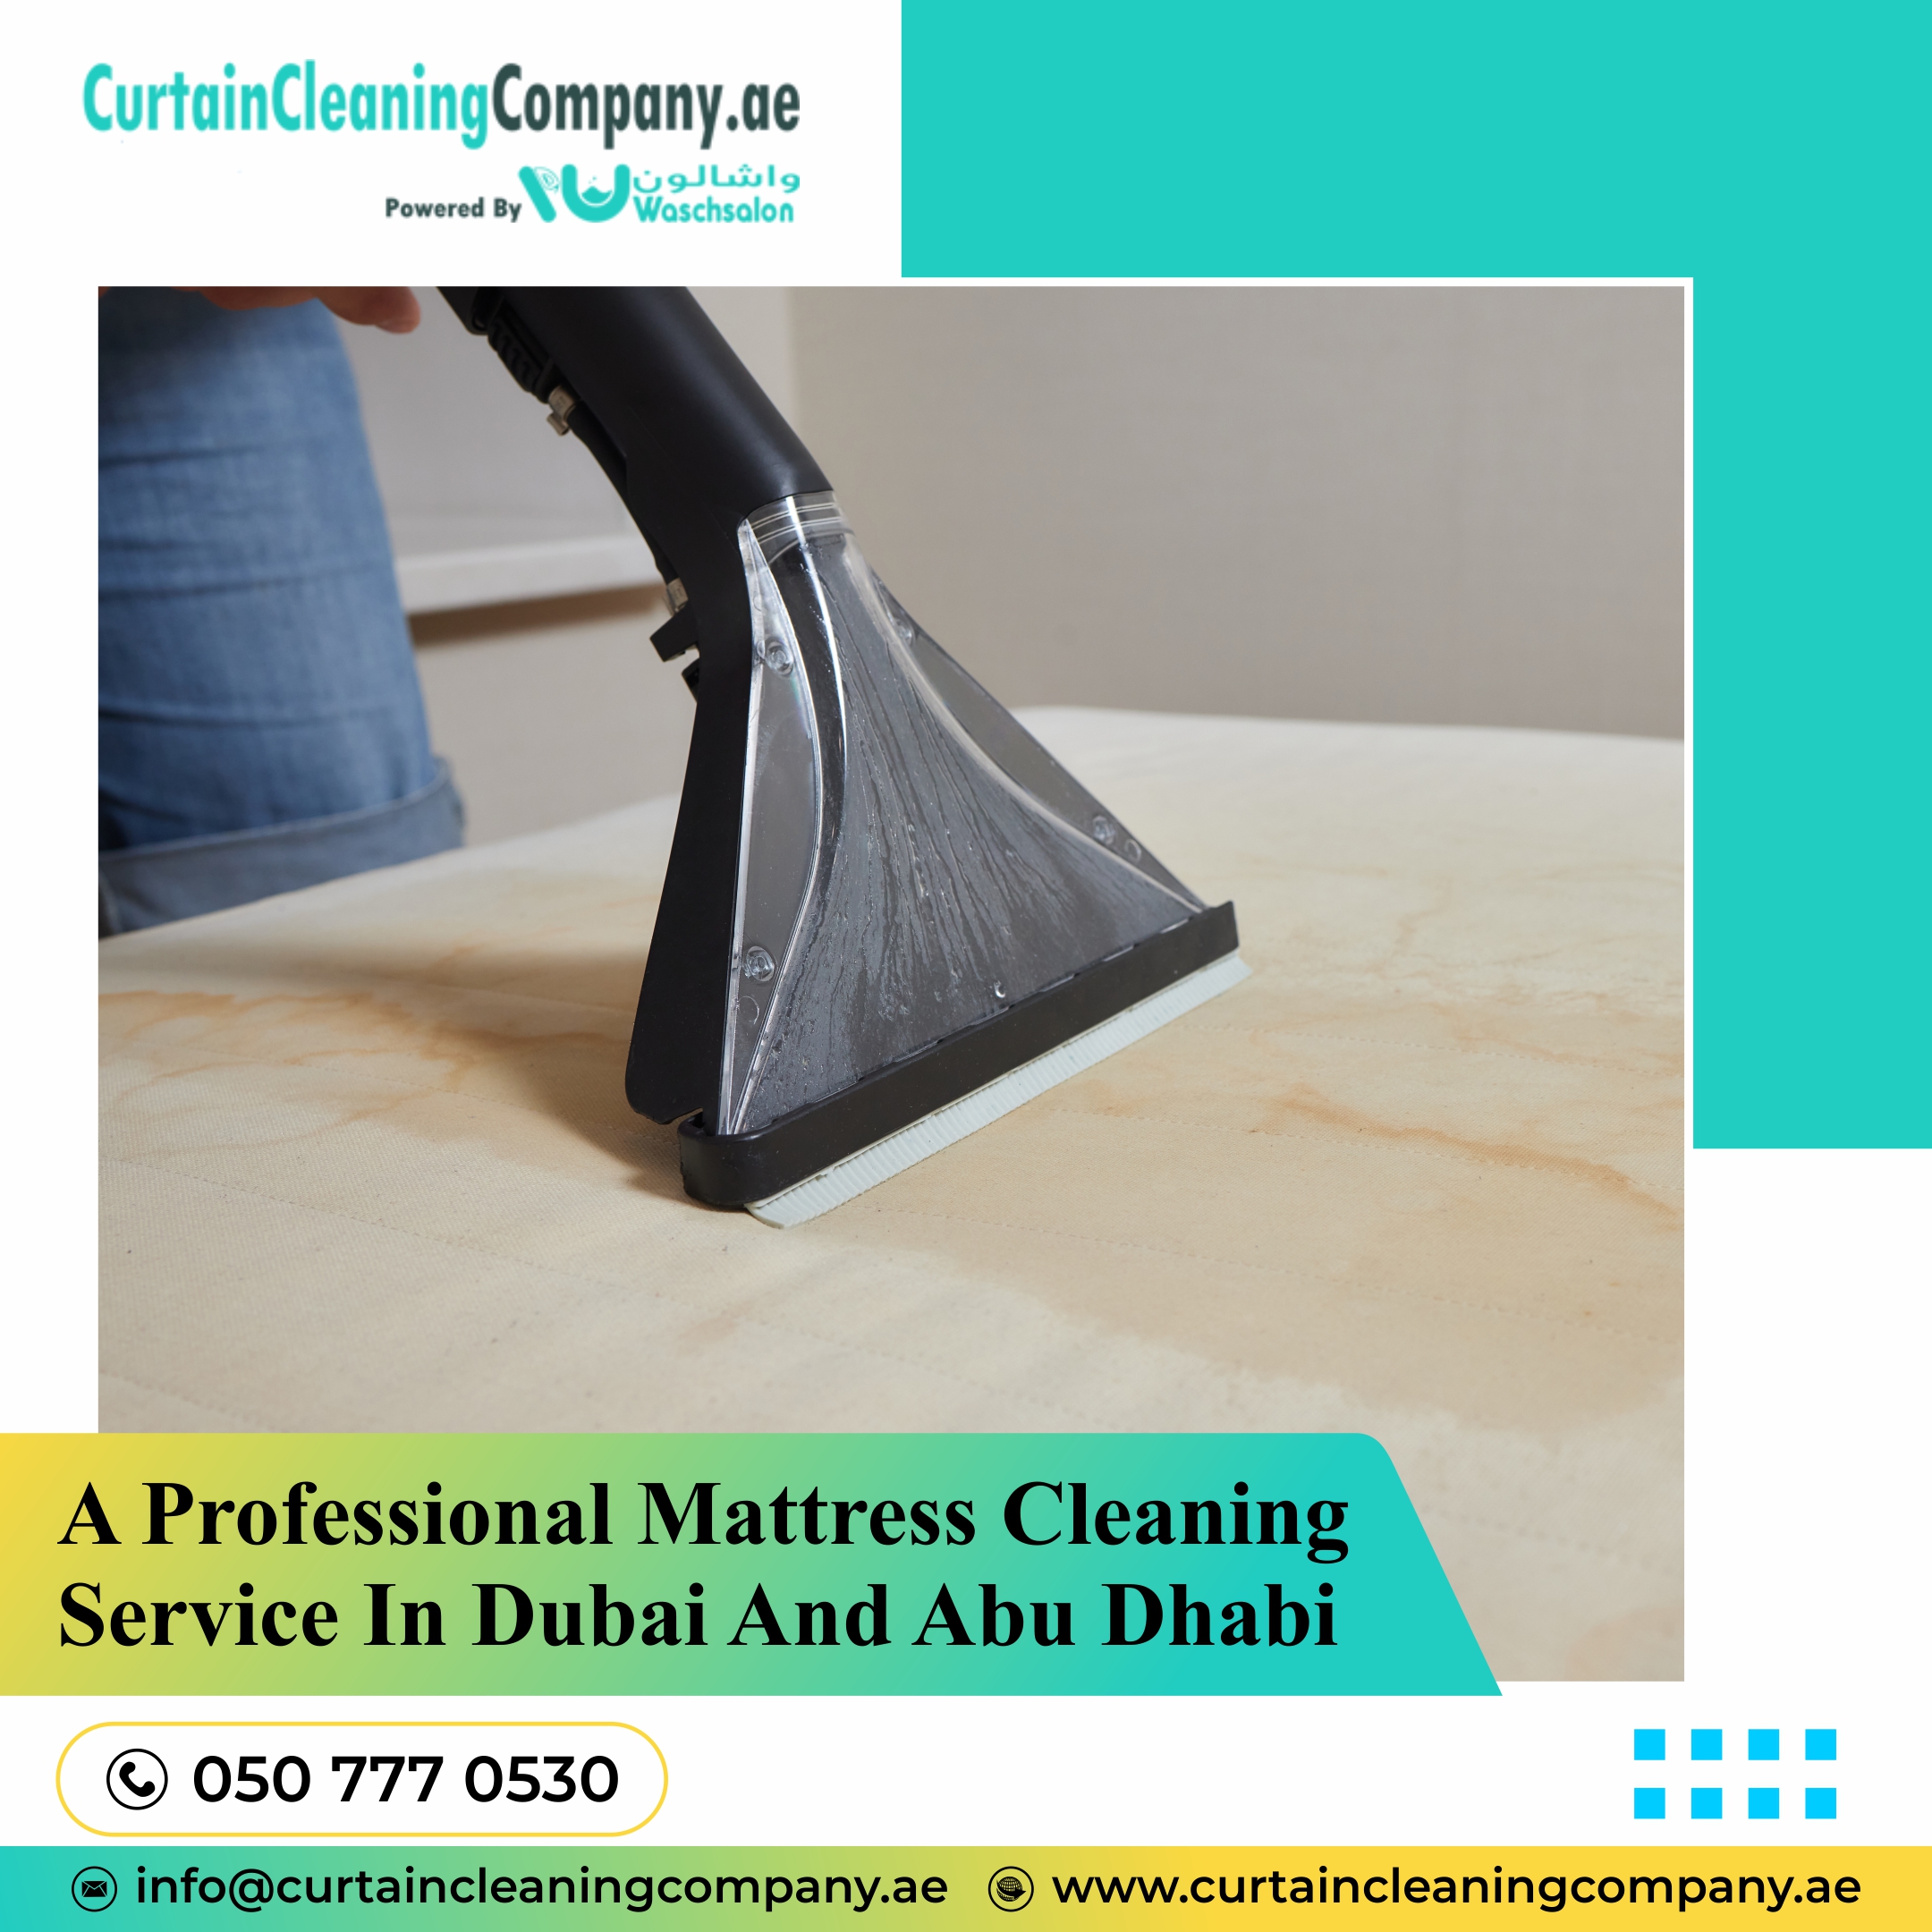 Mattress Cleaning Service In Abu Dhabi